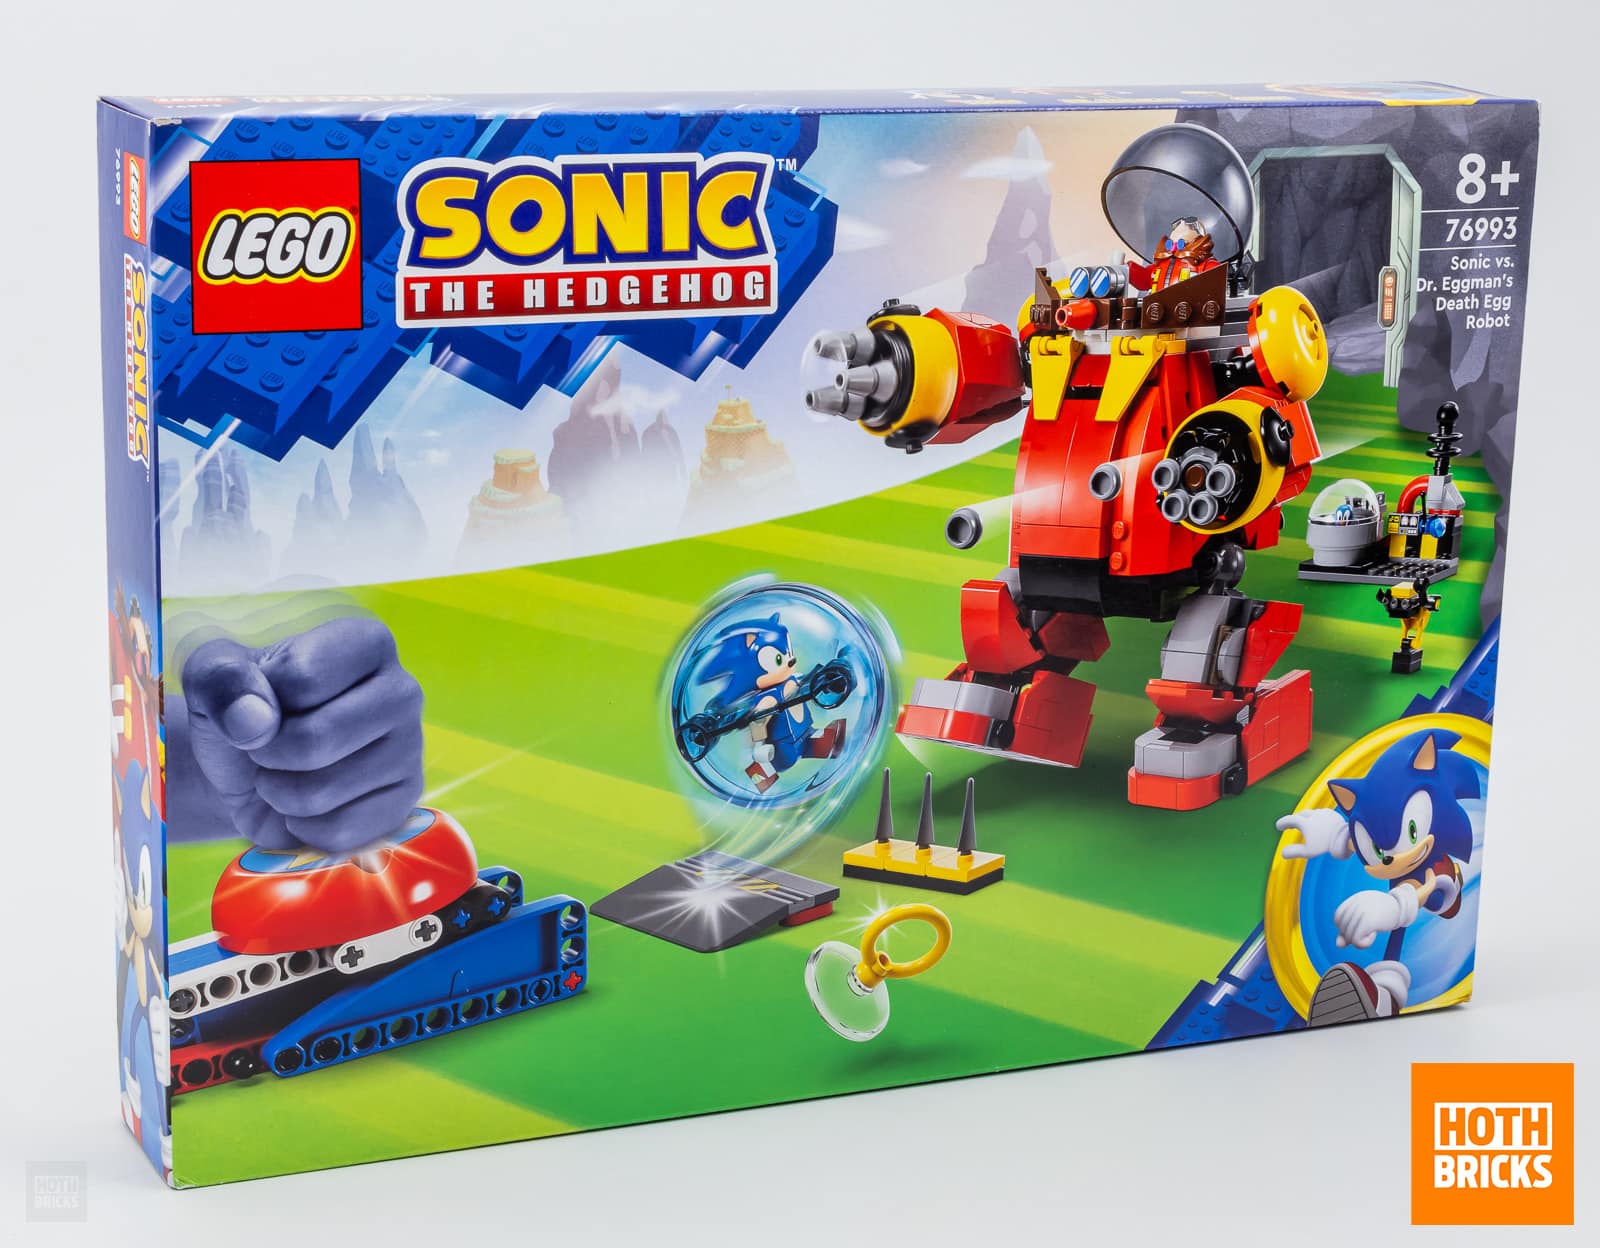 The Winners Of Our Sonic Superstars Game And LEGO Prize Packs